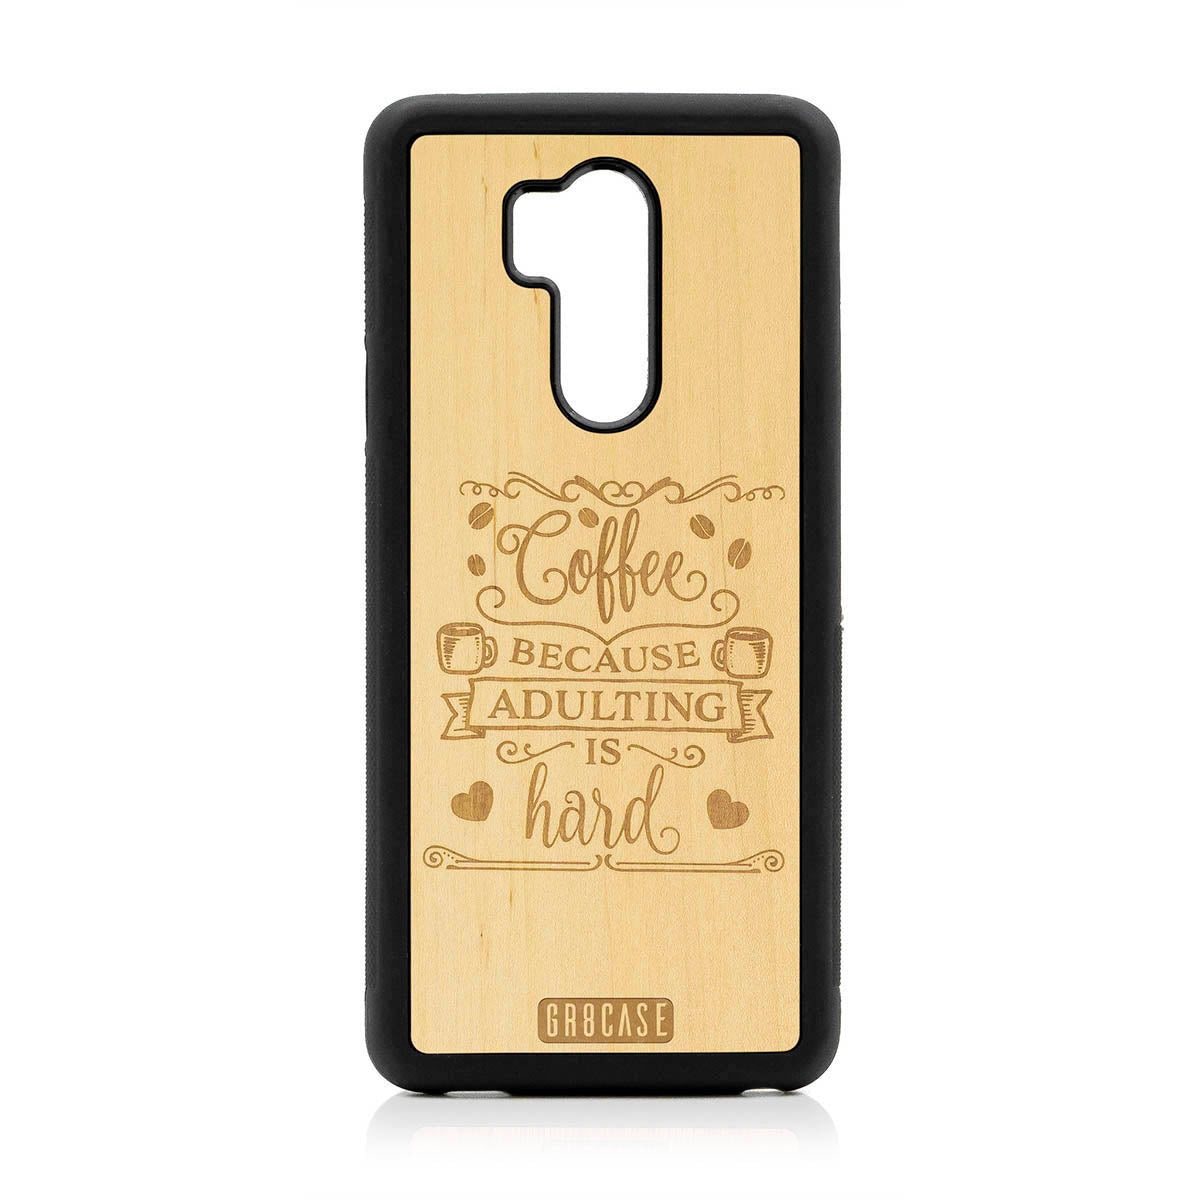 Coffee Because Adulting Is Hard Design Wood Case For LG G7 ThinQ